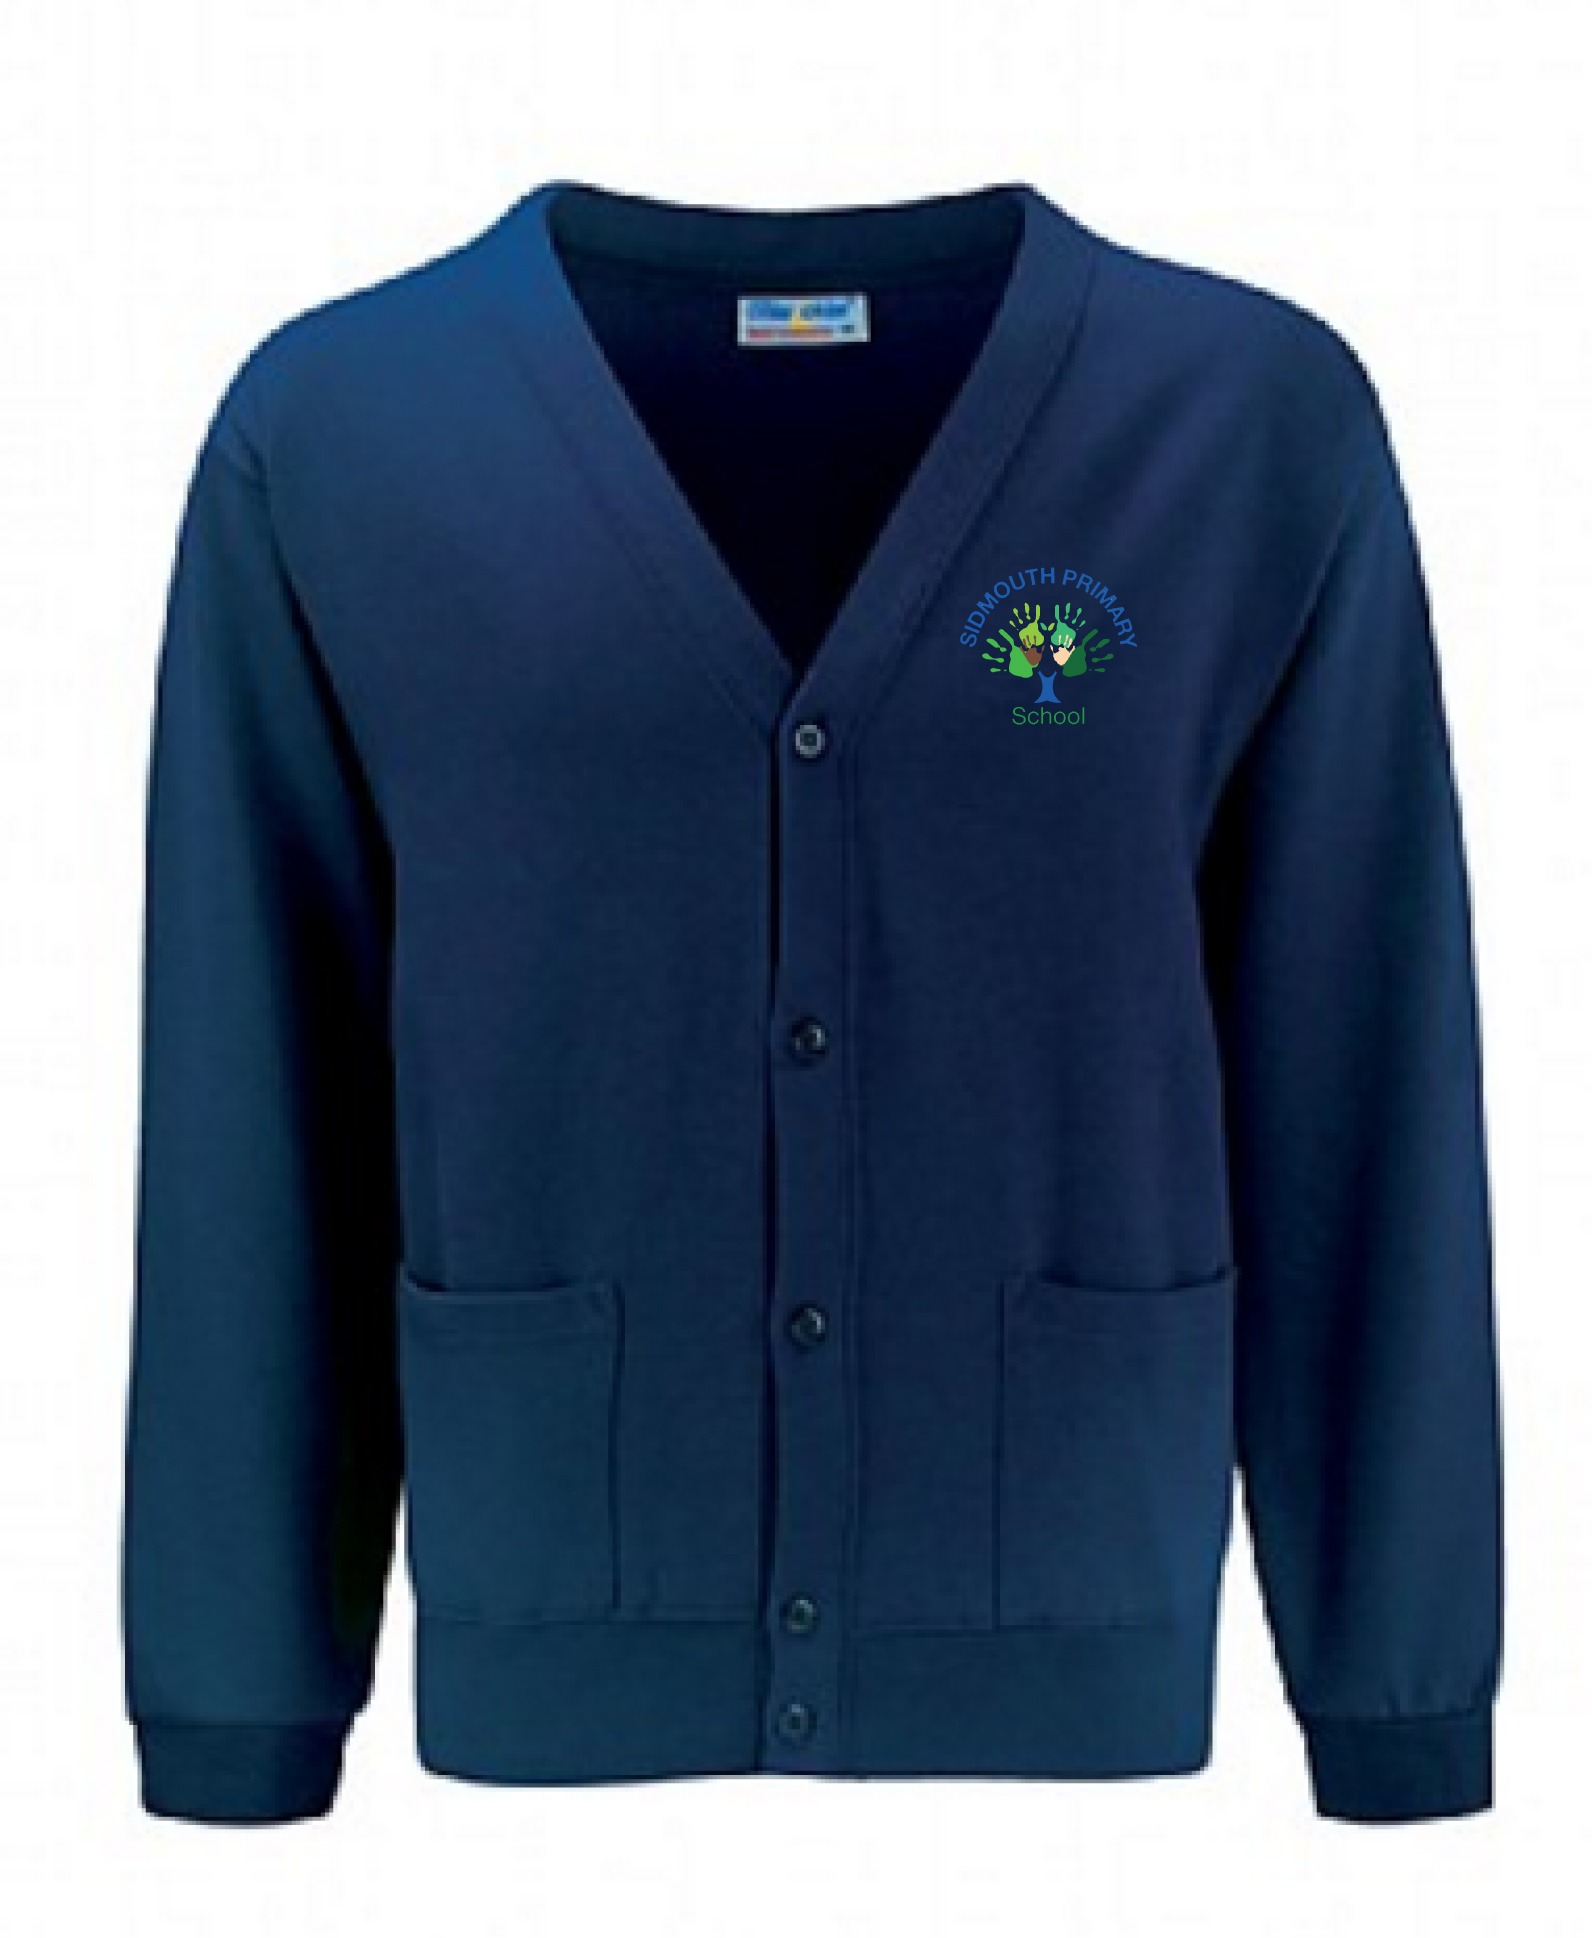 Sidmouth Primary School Adult Navy Cardigan - X3 Clothing Online